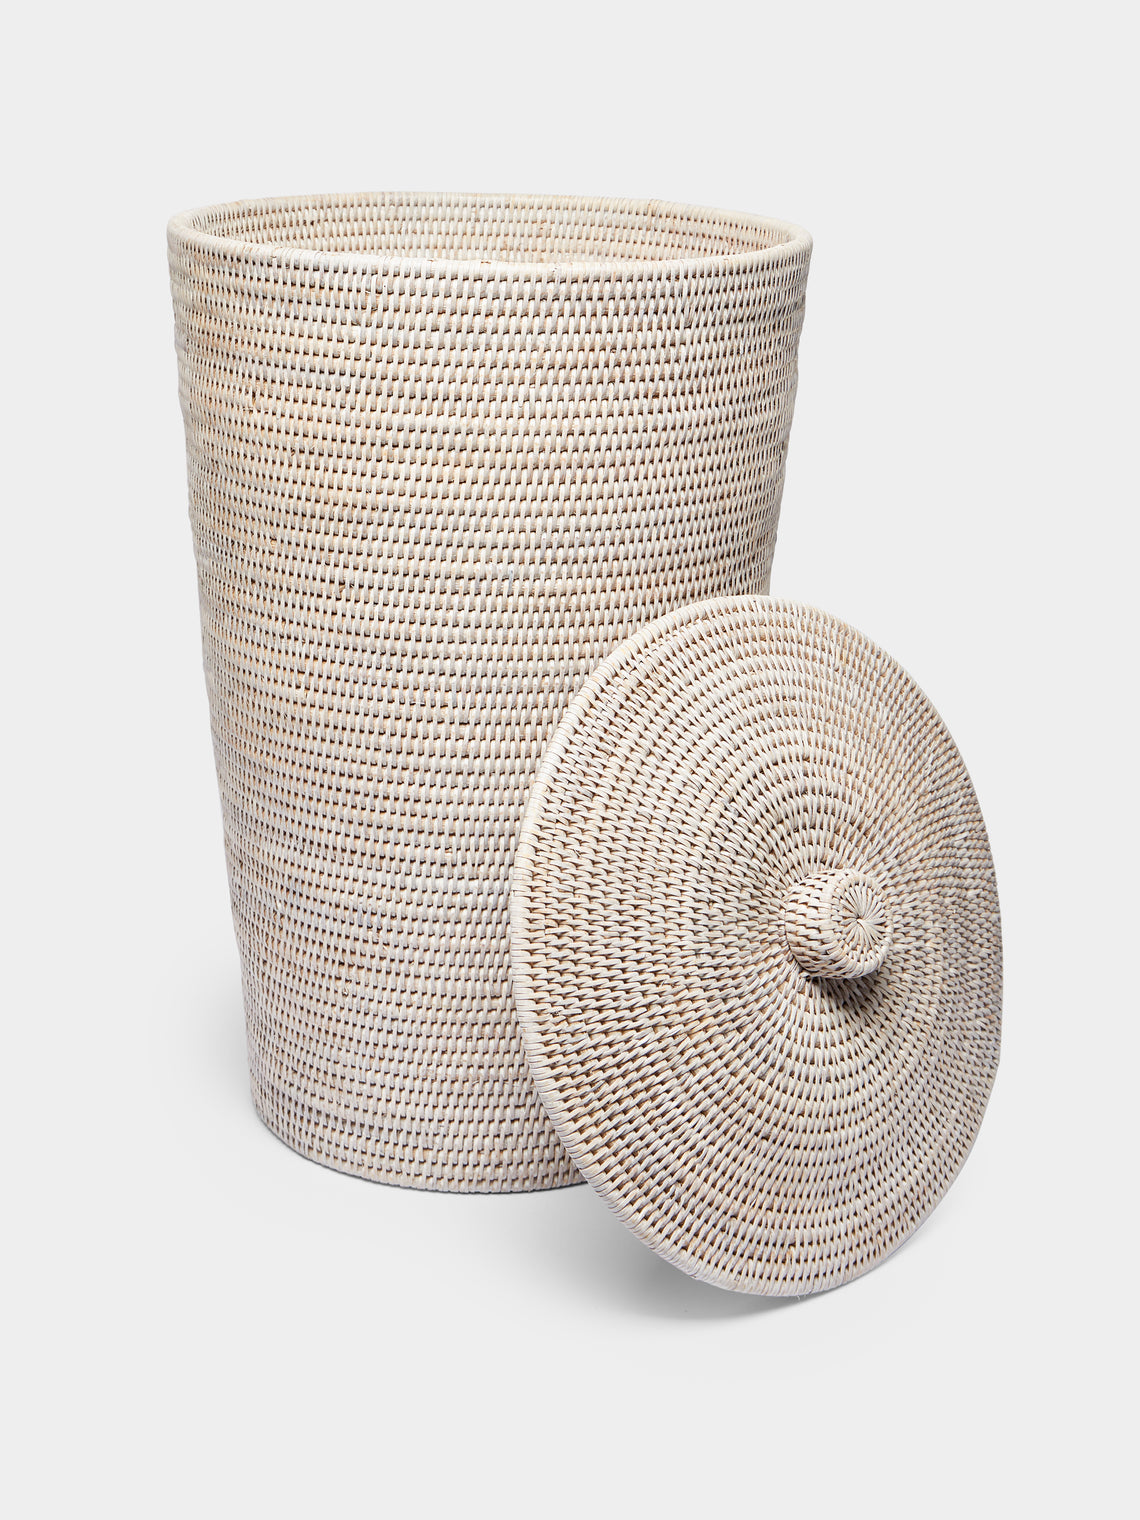 Décor Walther - Handwoven Rattan Laundry Basket -  - ABASK